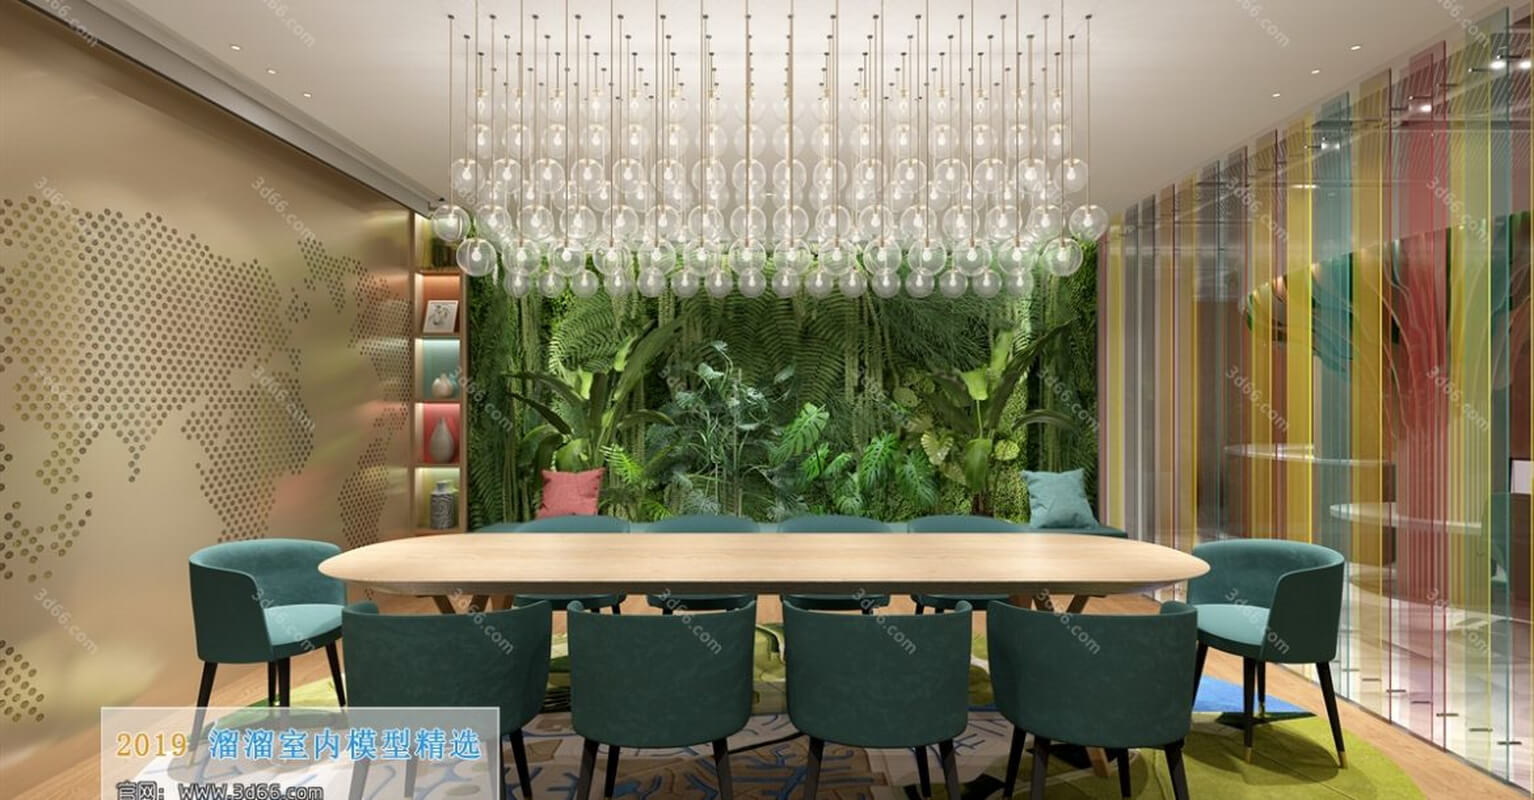 3D66 Office & Meeting & Reception Room Interior 2019 Style (02)